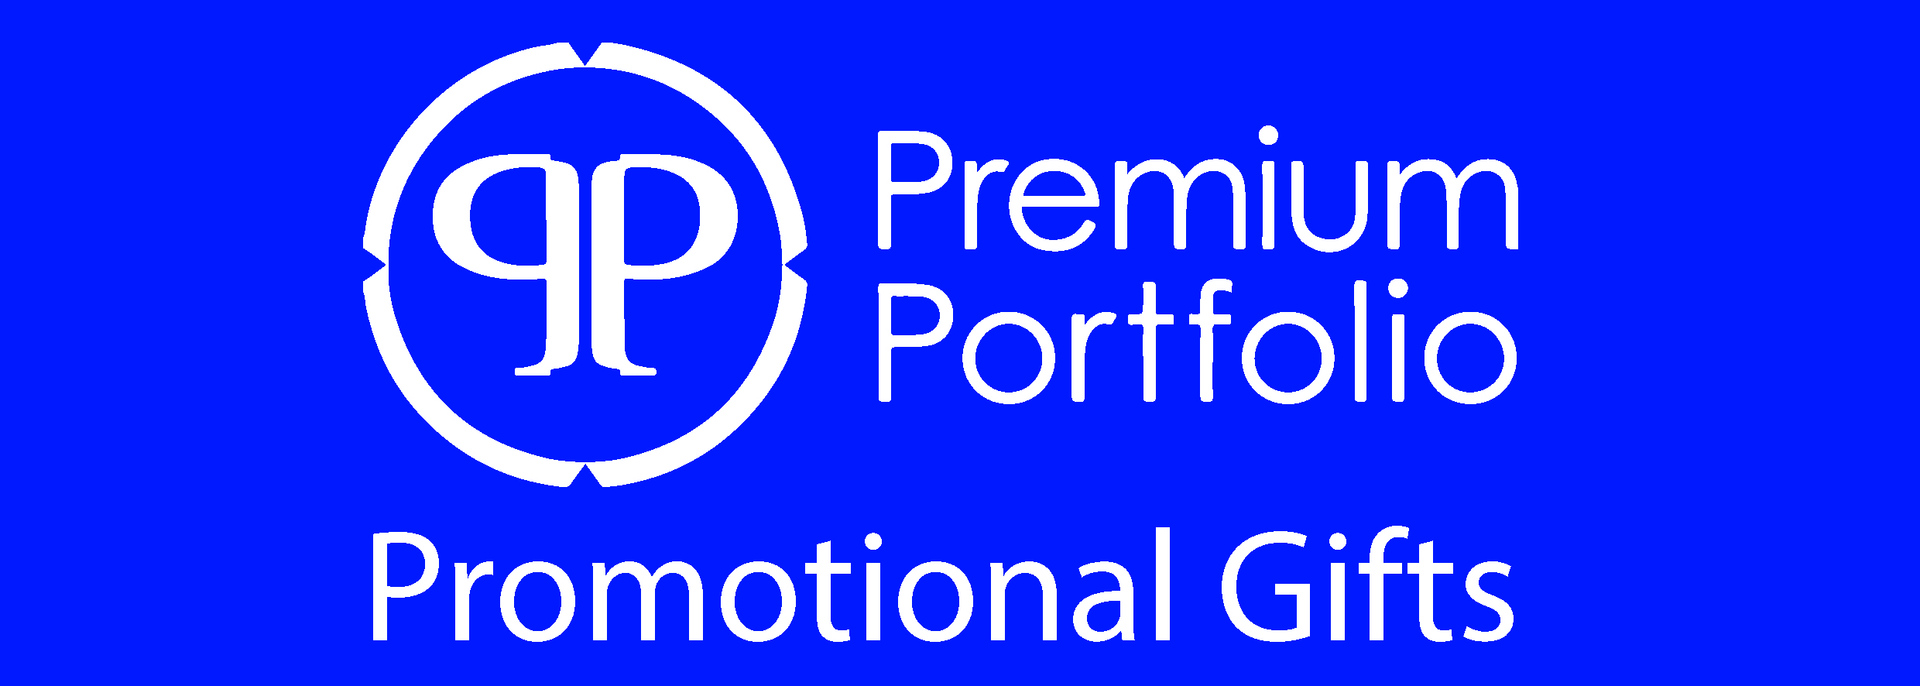 Promotional Gifts - From Proctor's NI